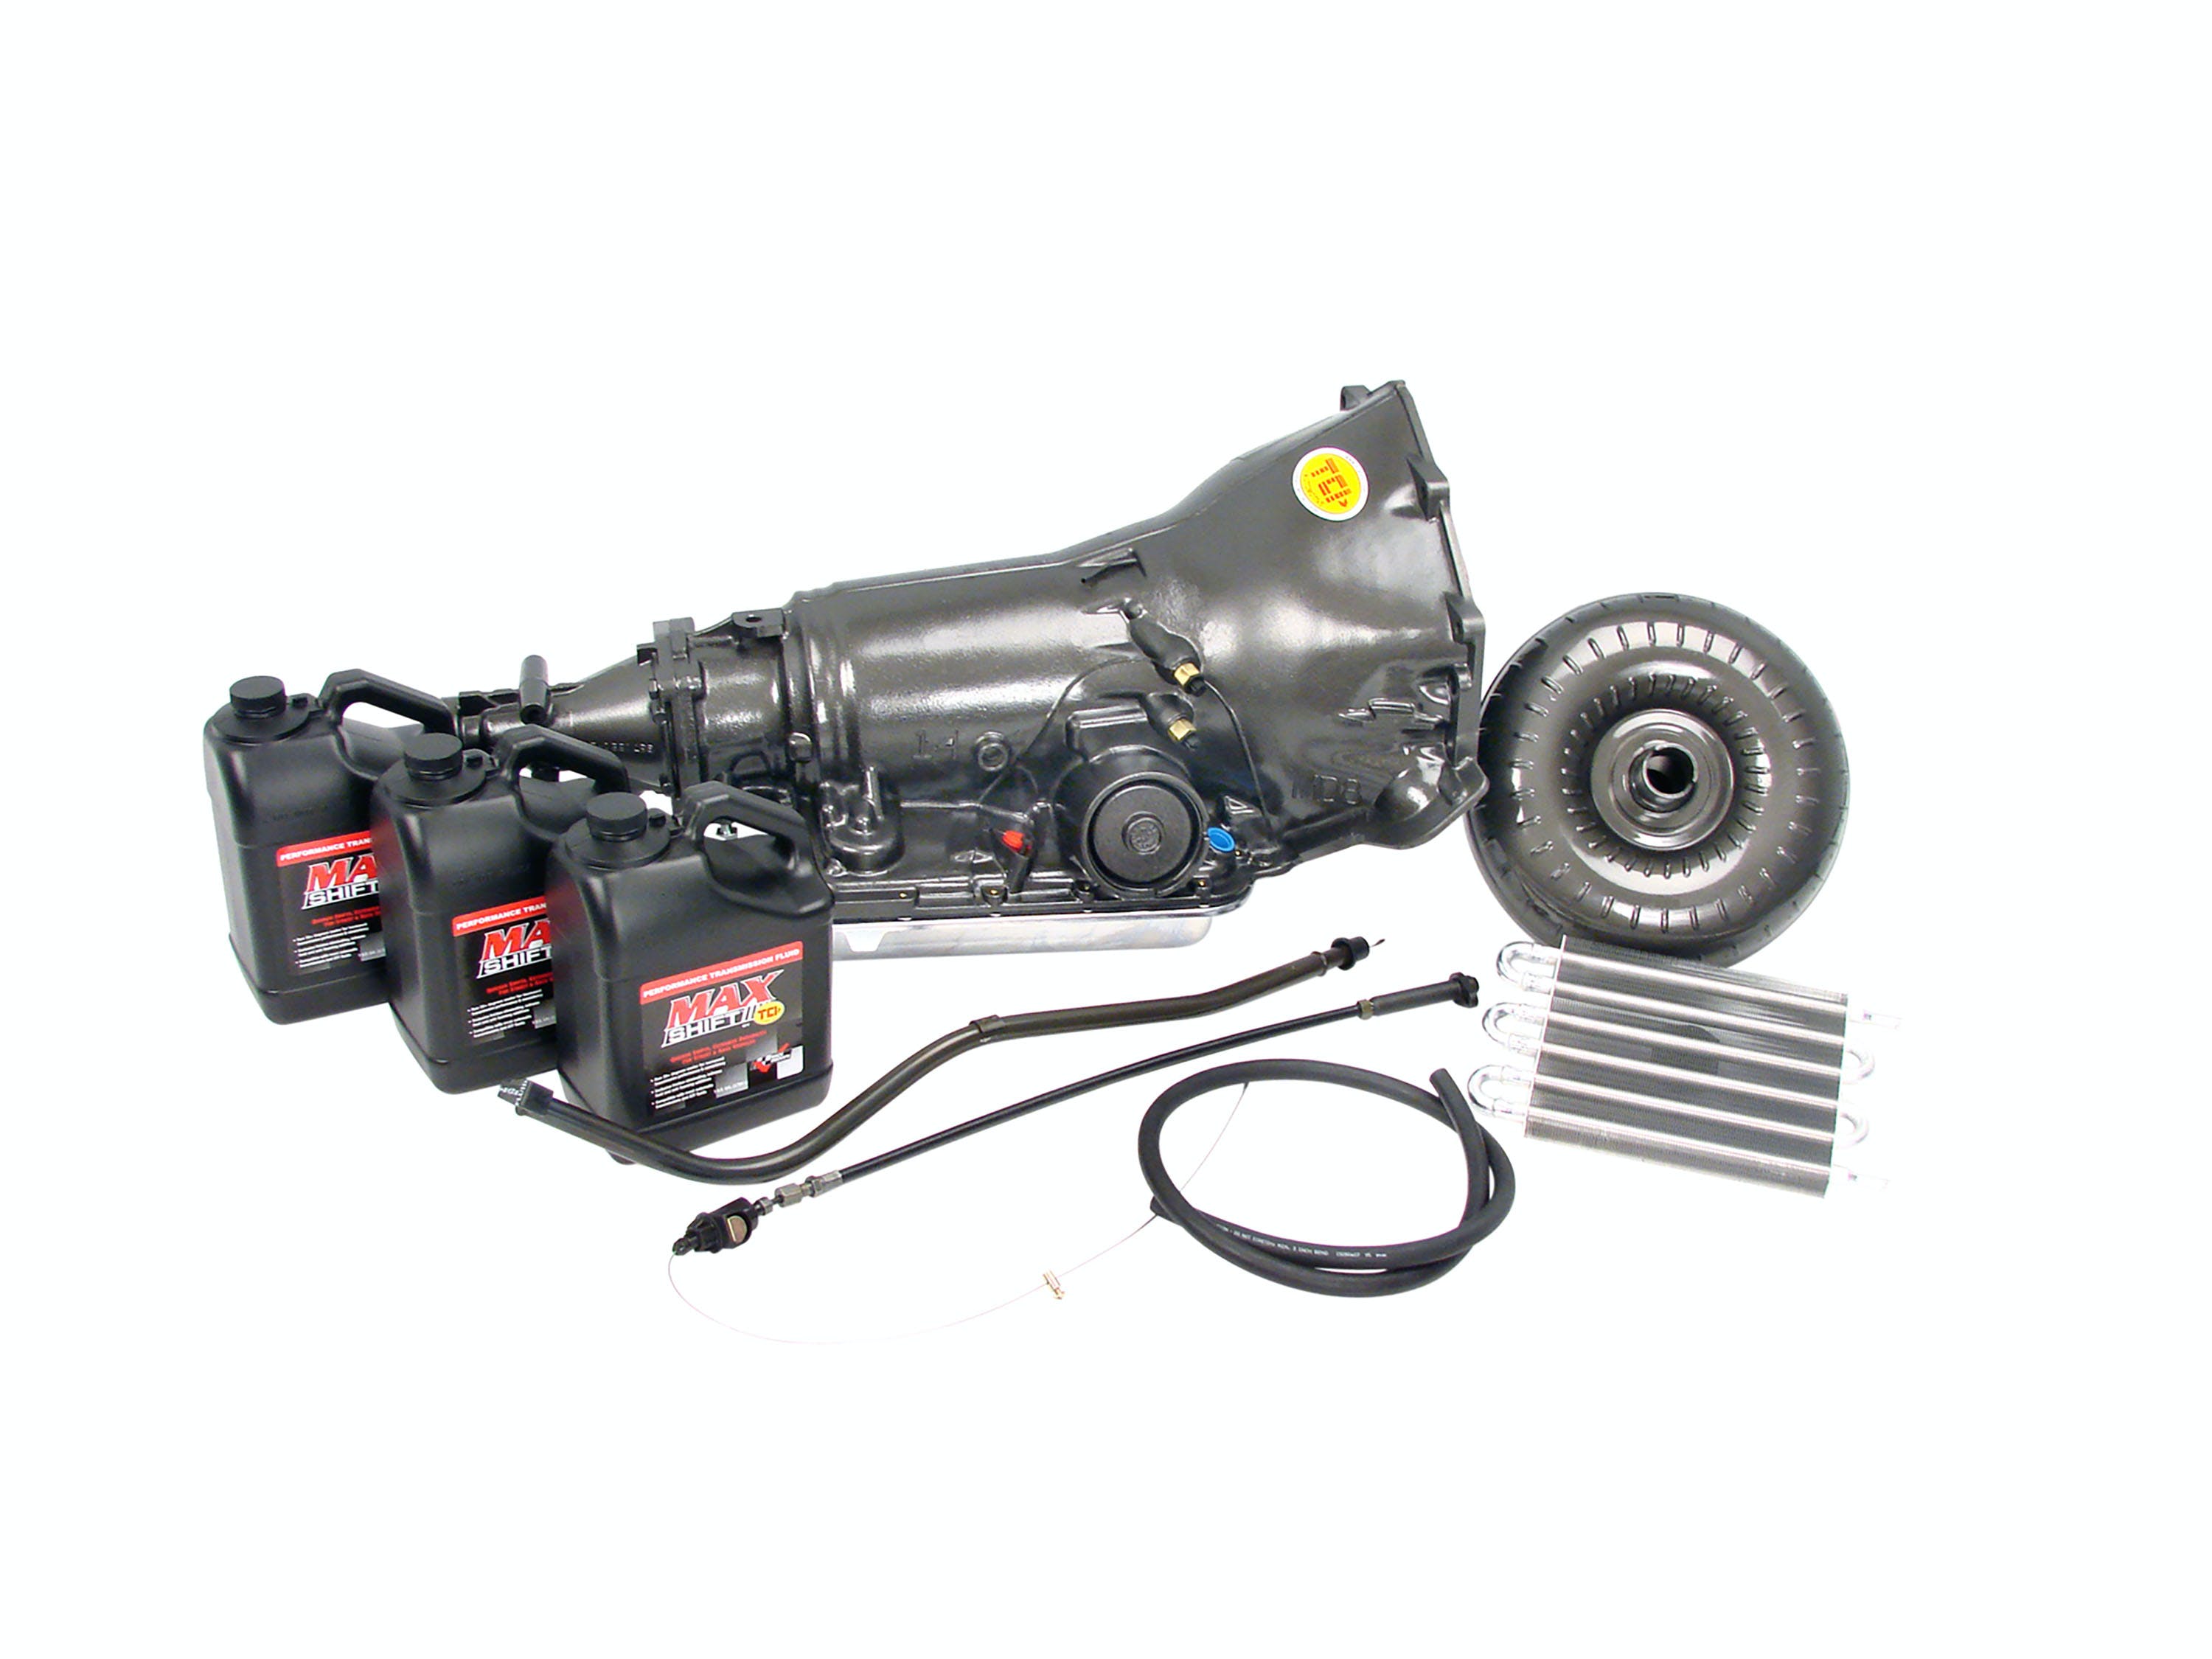 TCI Automotive 371000P4 700R4 StreetFighter Transmission Package 4